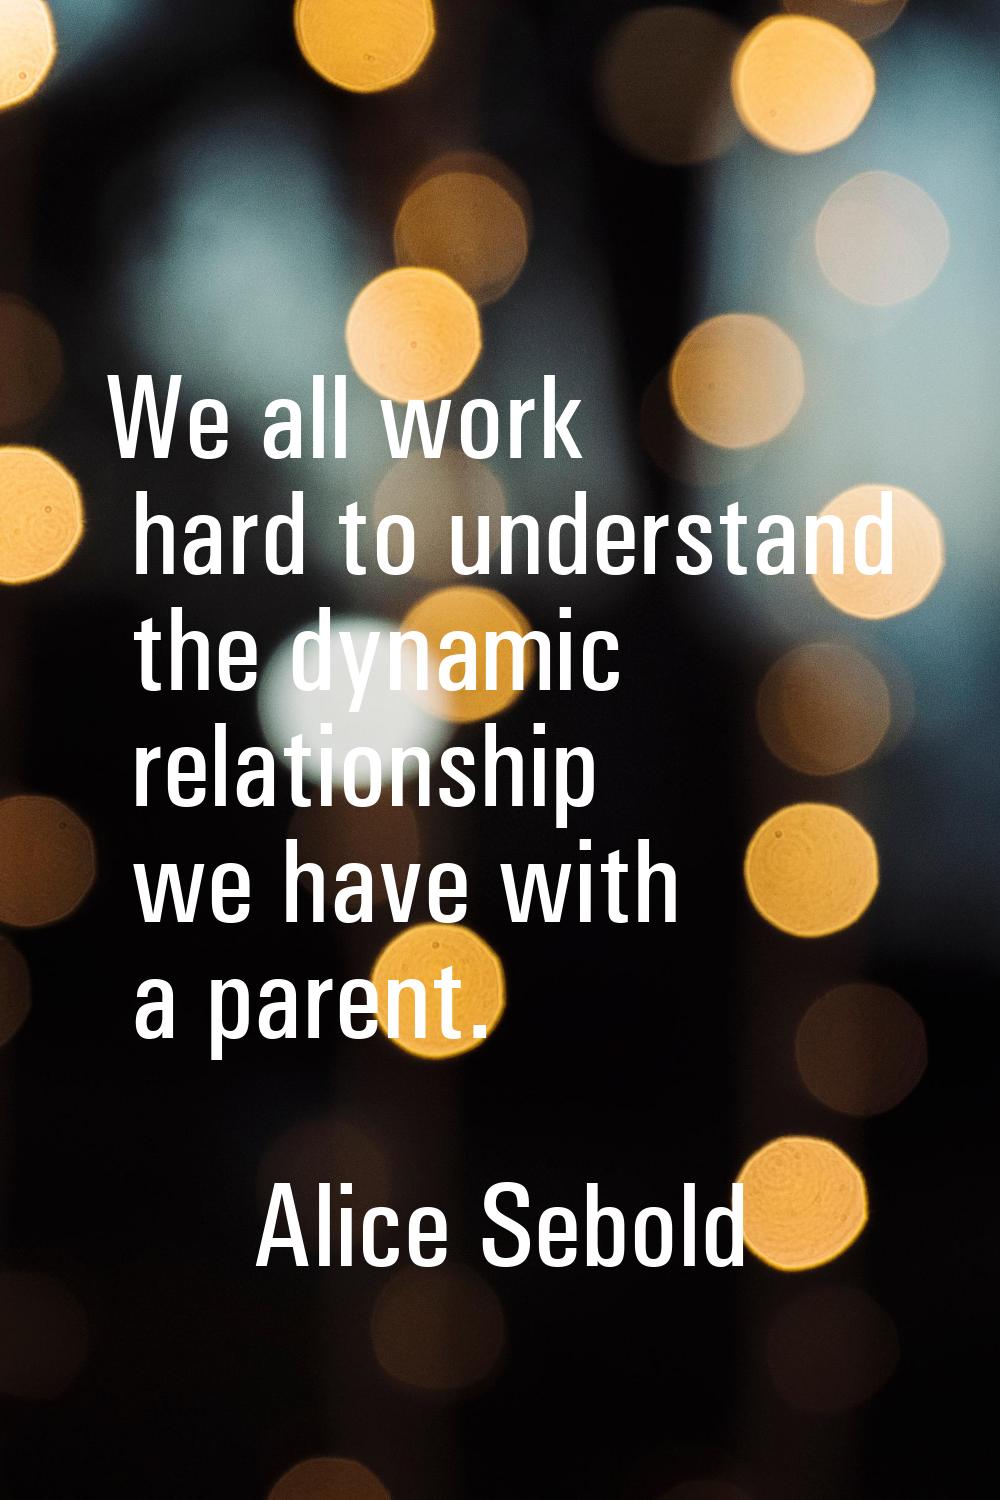 We all work hard to understand the dynamic relationship we have with a parent.